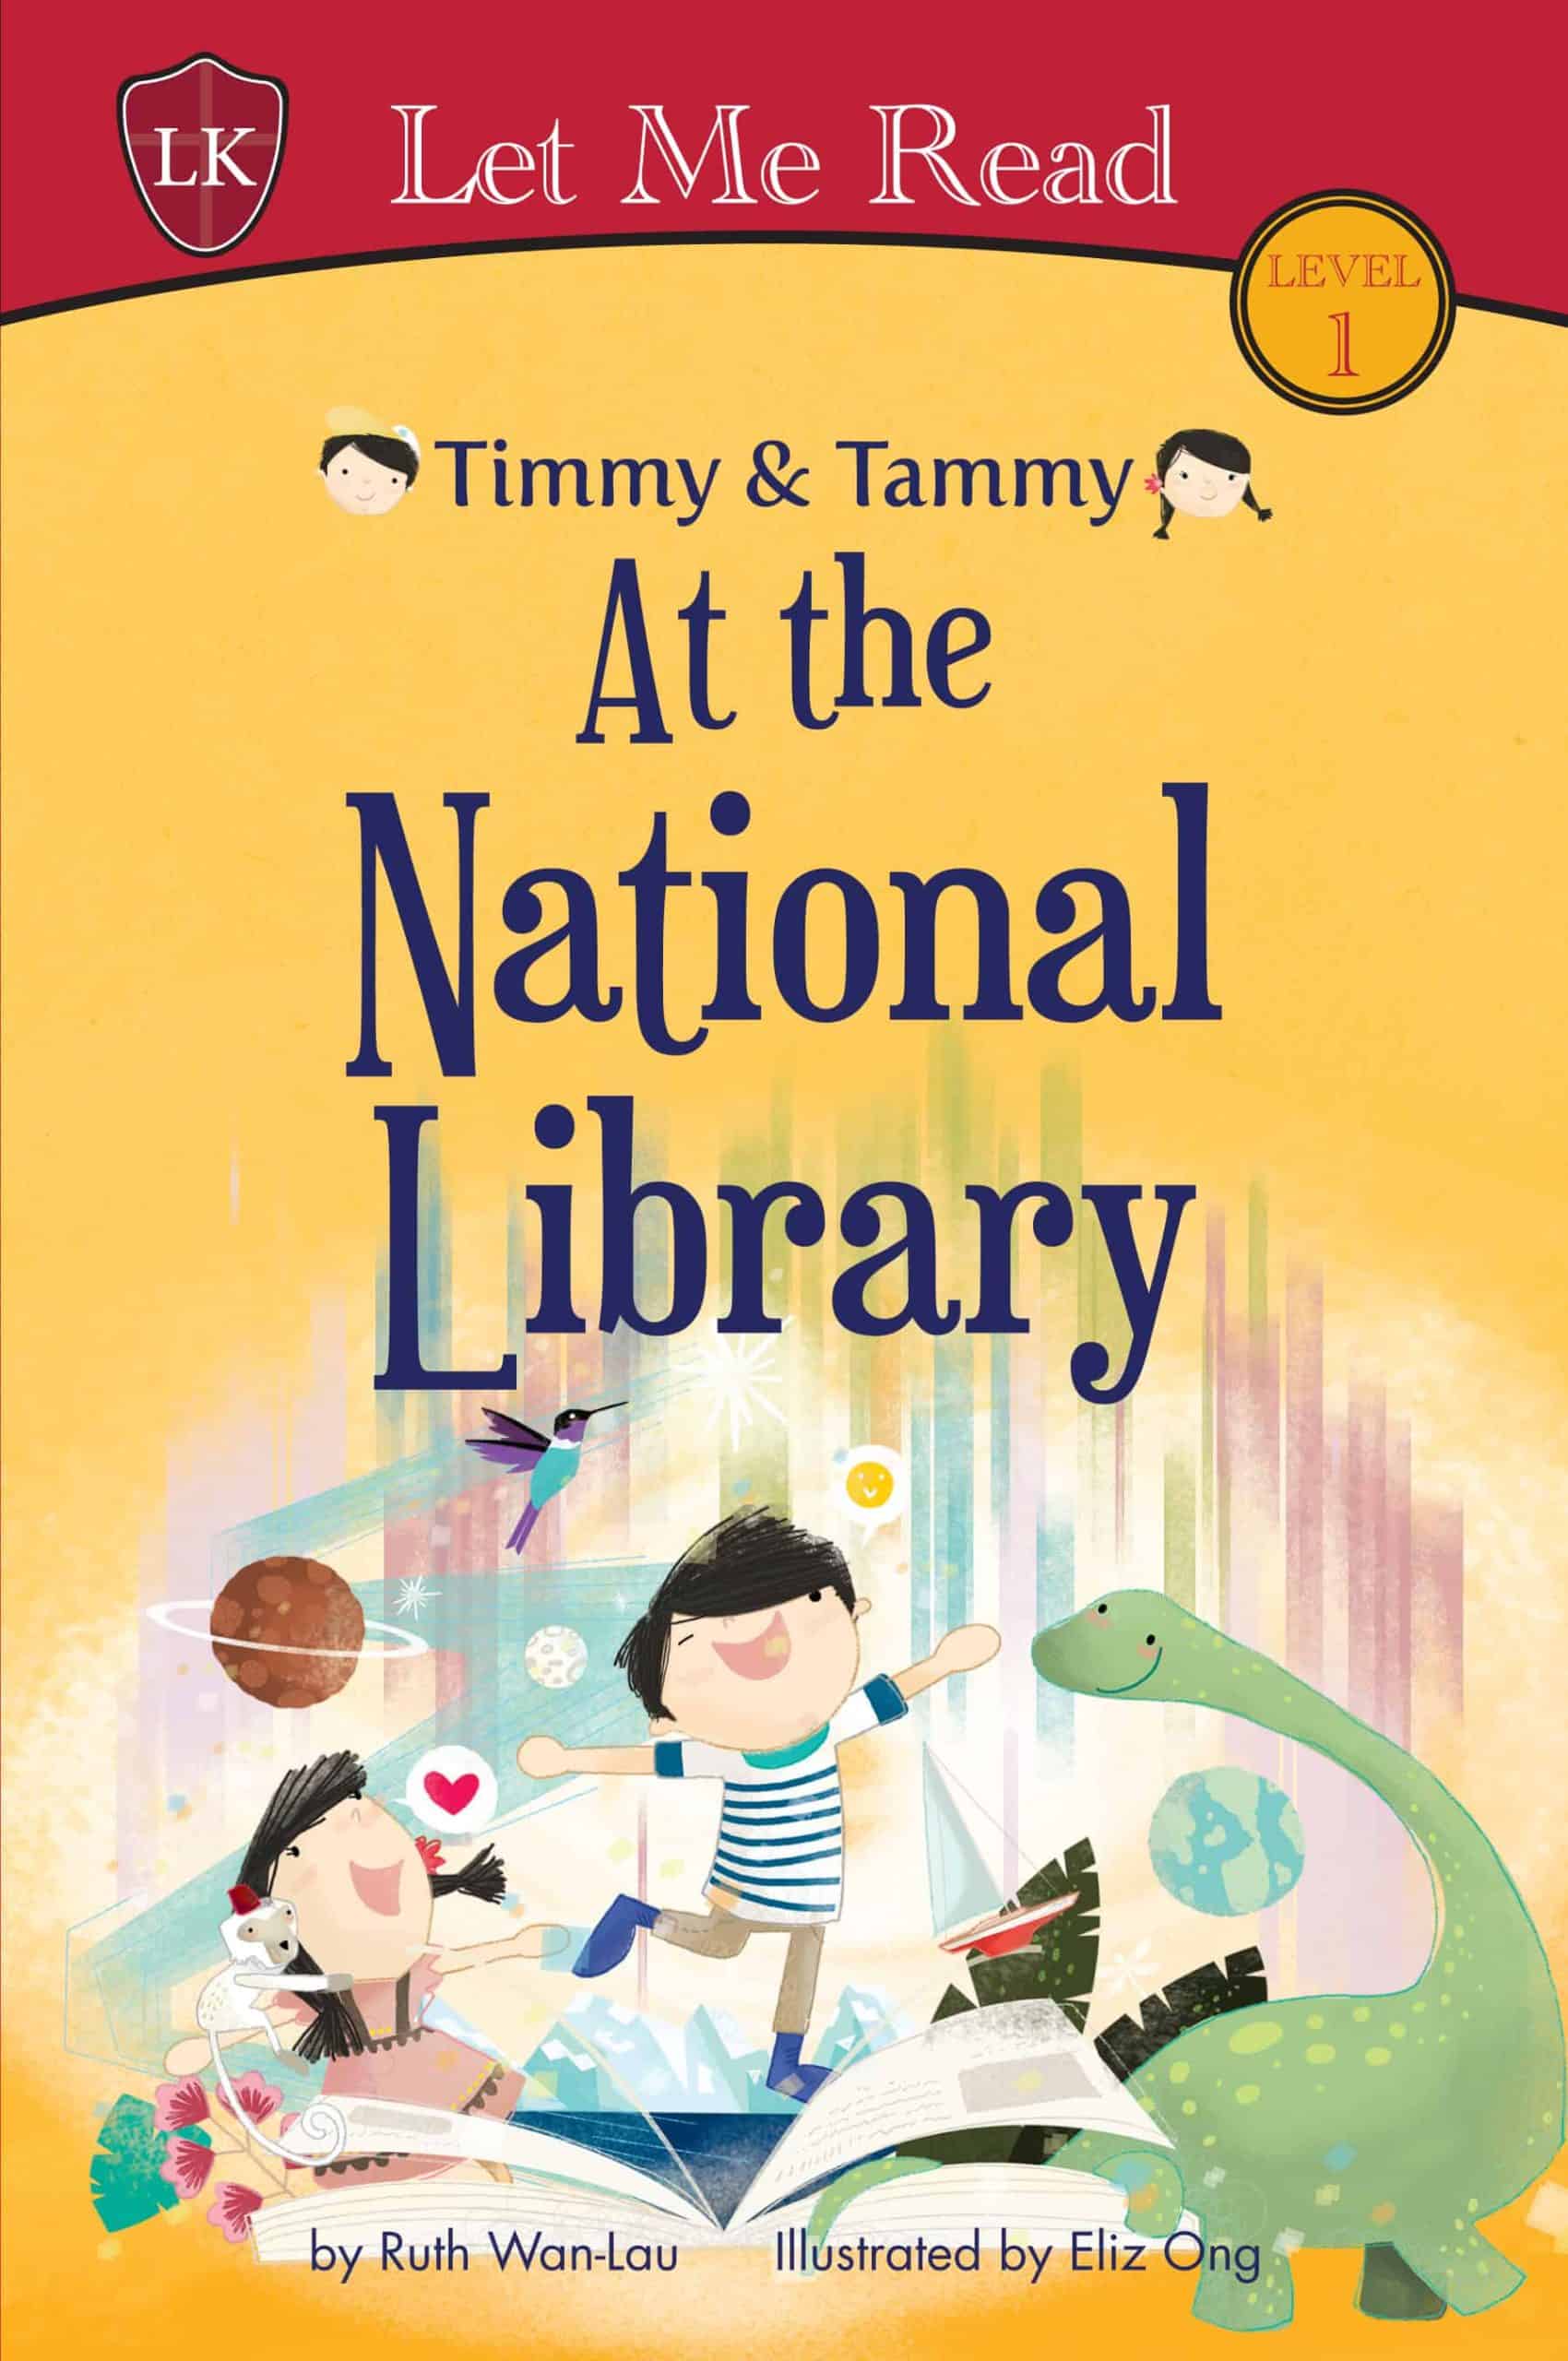 Timmy & Tammy (Level 1): At the National Library